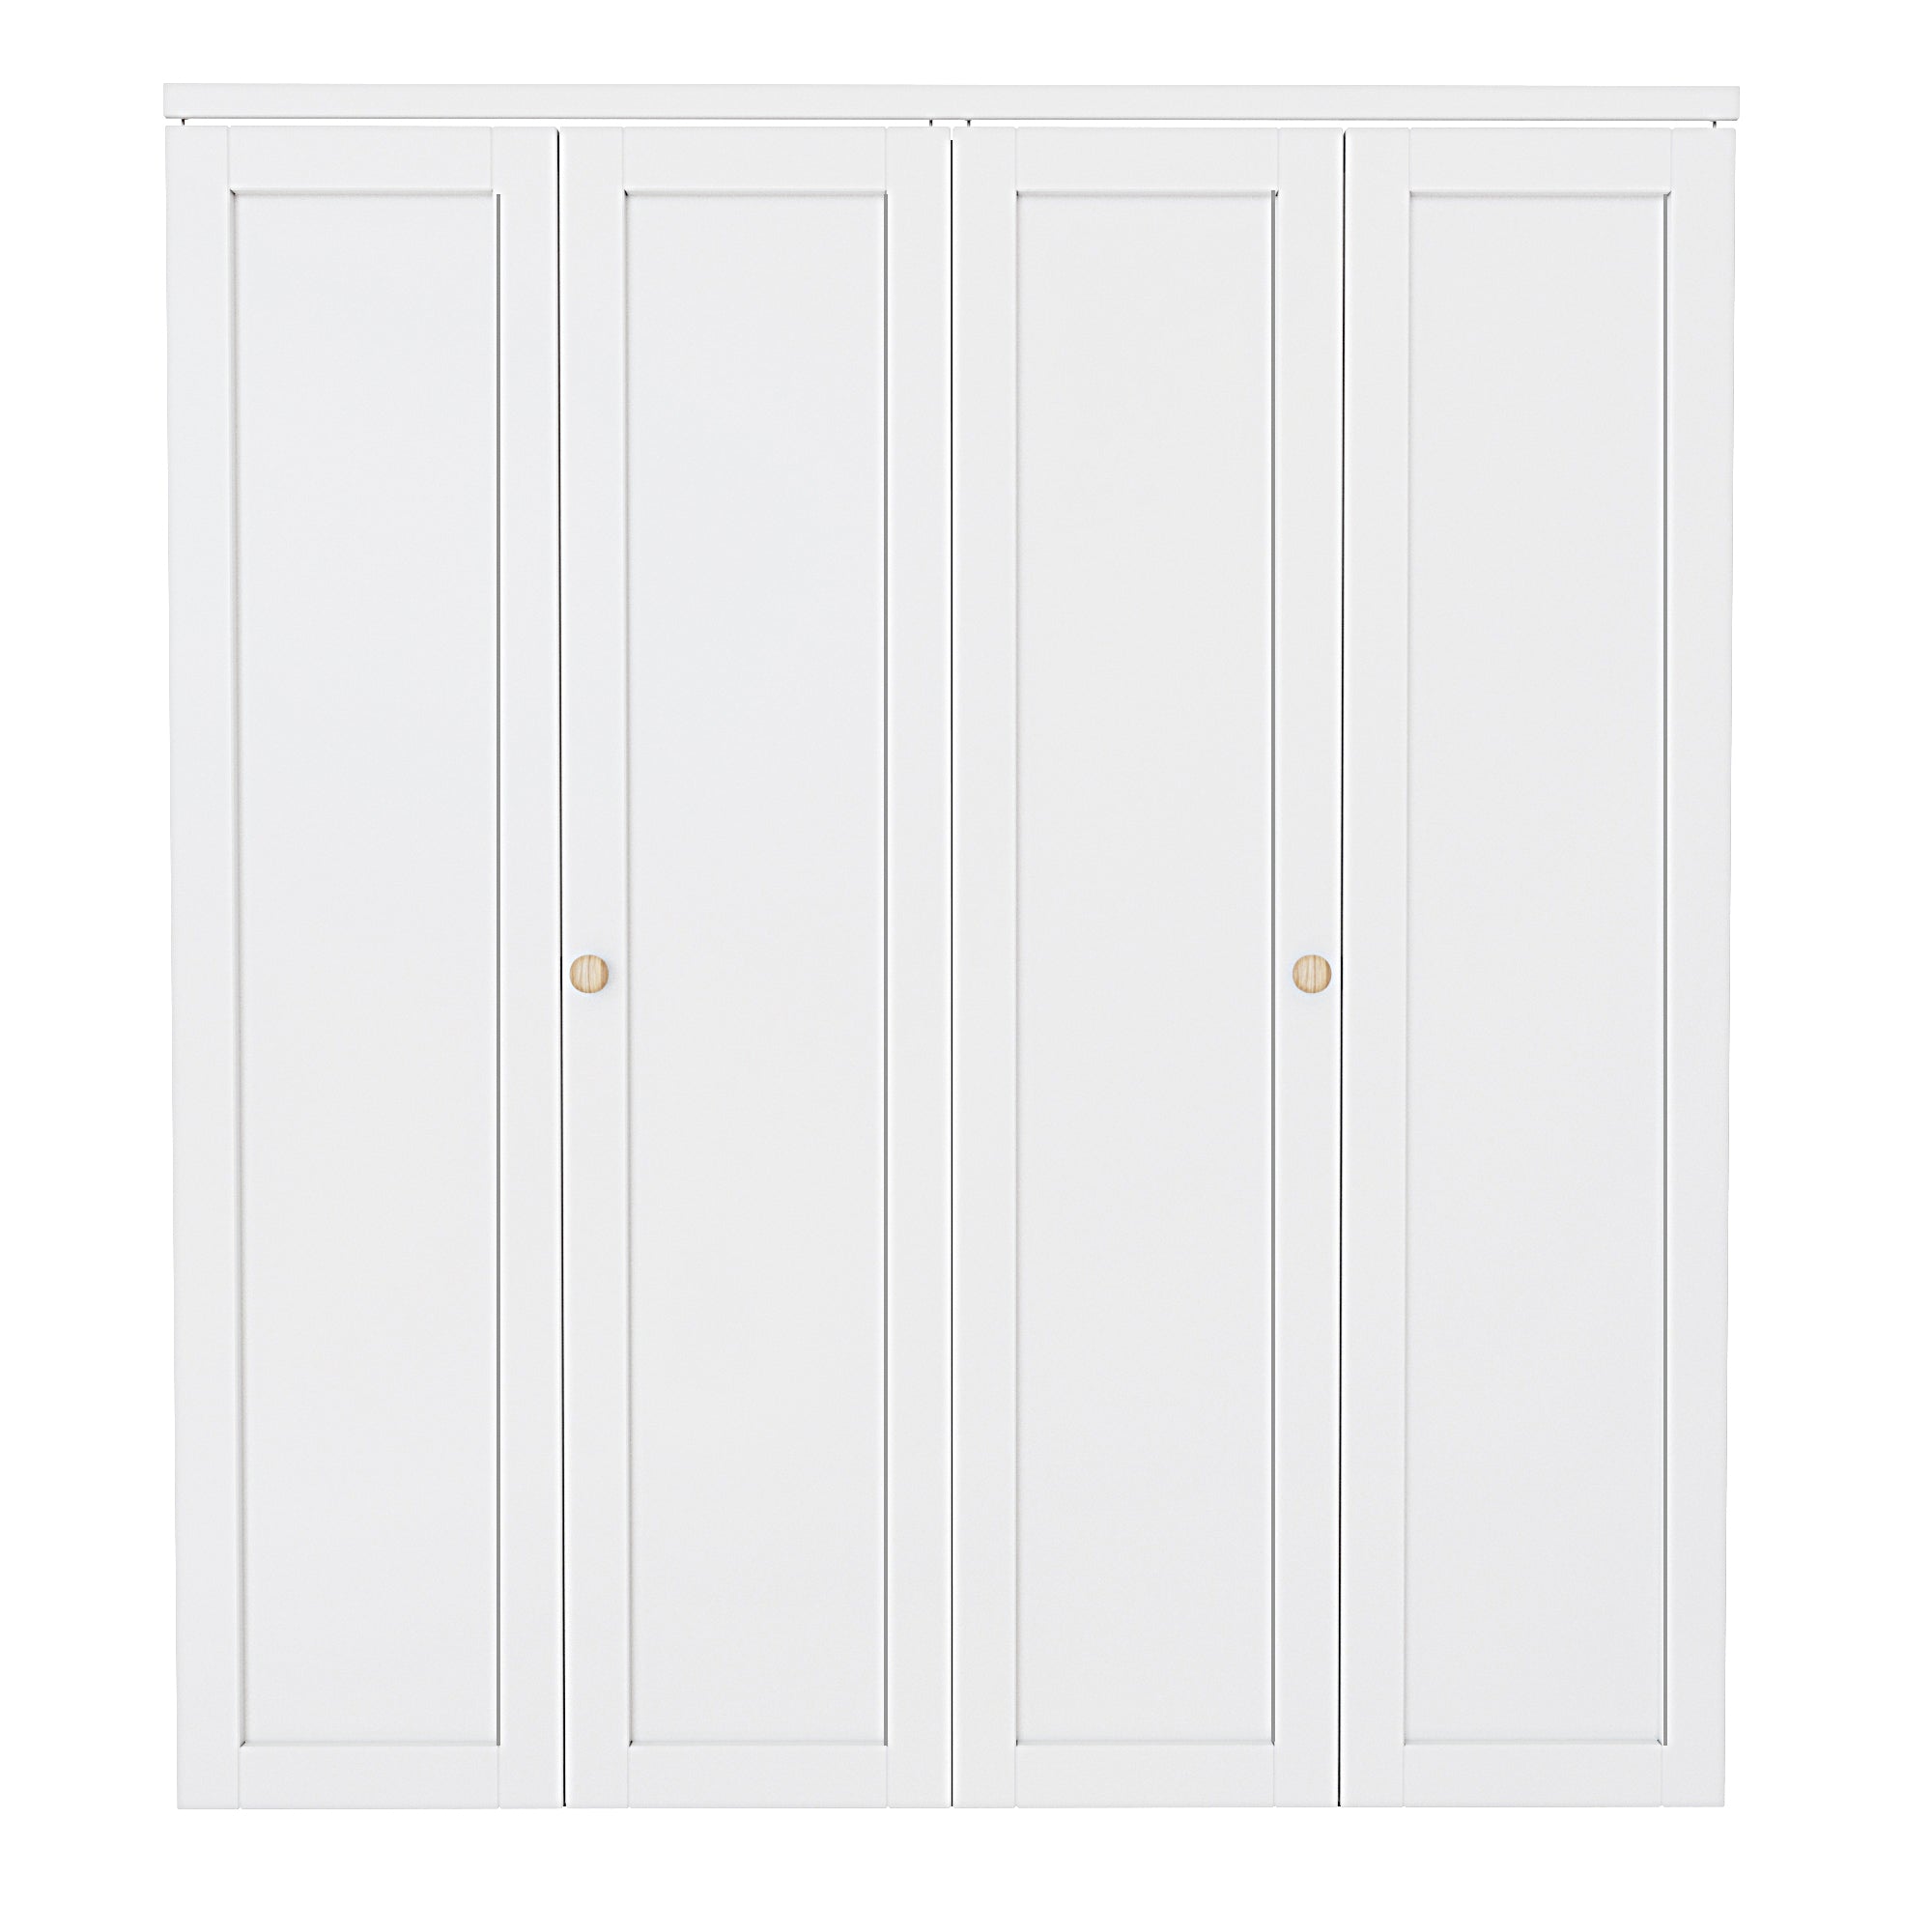 [Paintable] Ark Design Panel Bifold Door with Hardware Kit & Knob, Solid Core MDF Wood & Primed, White